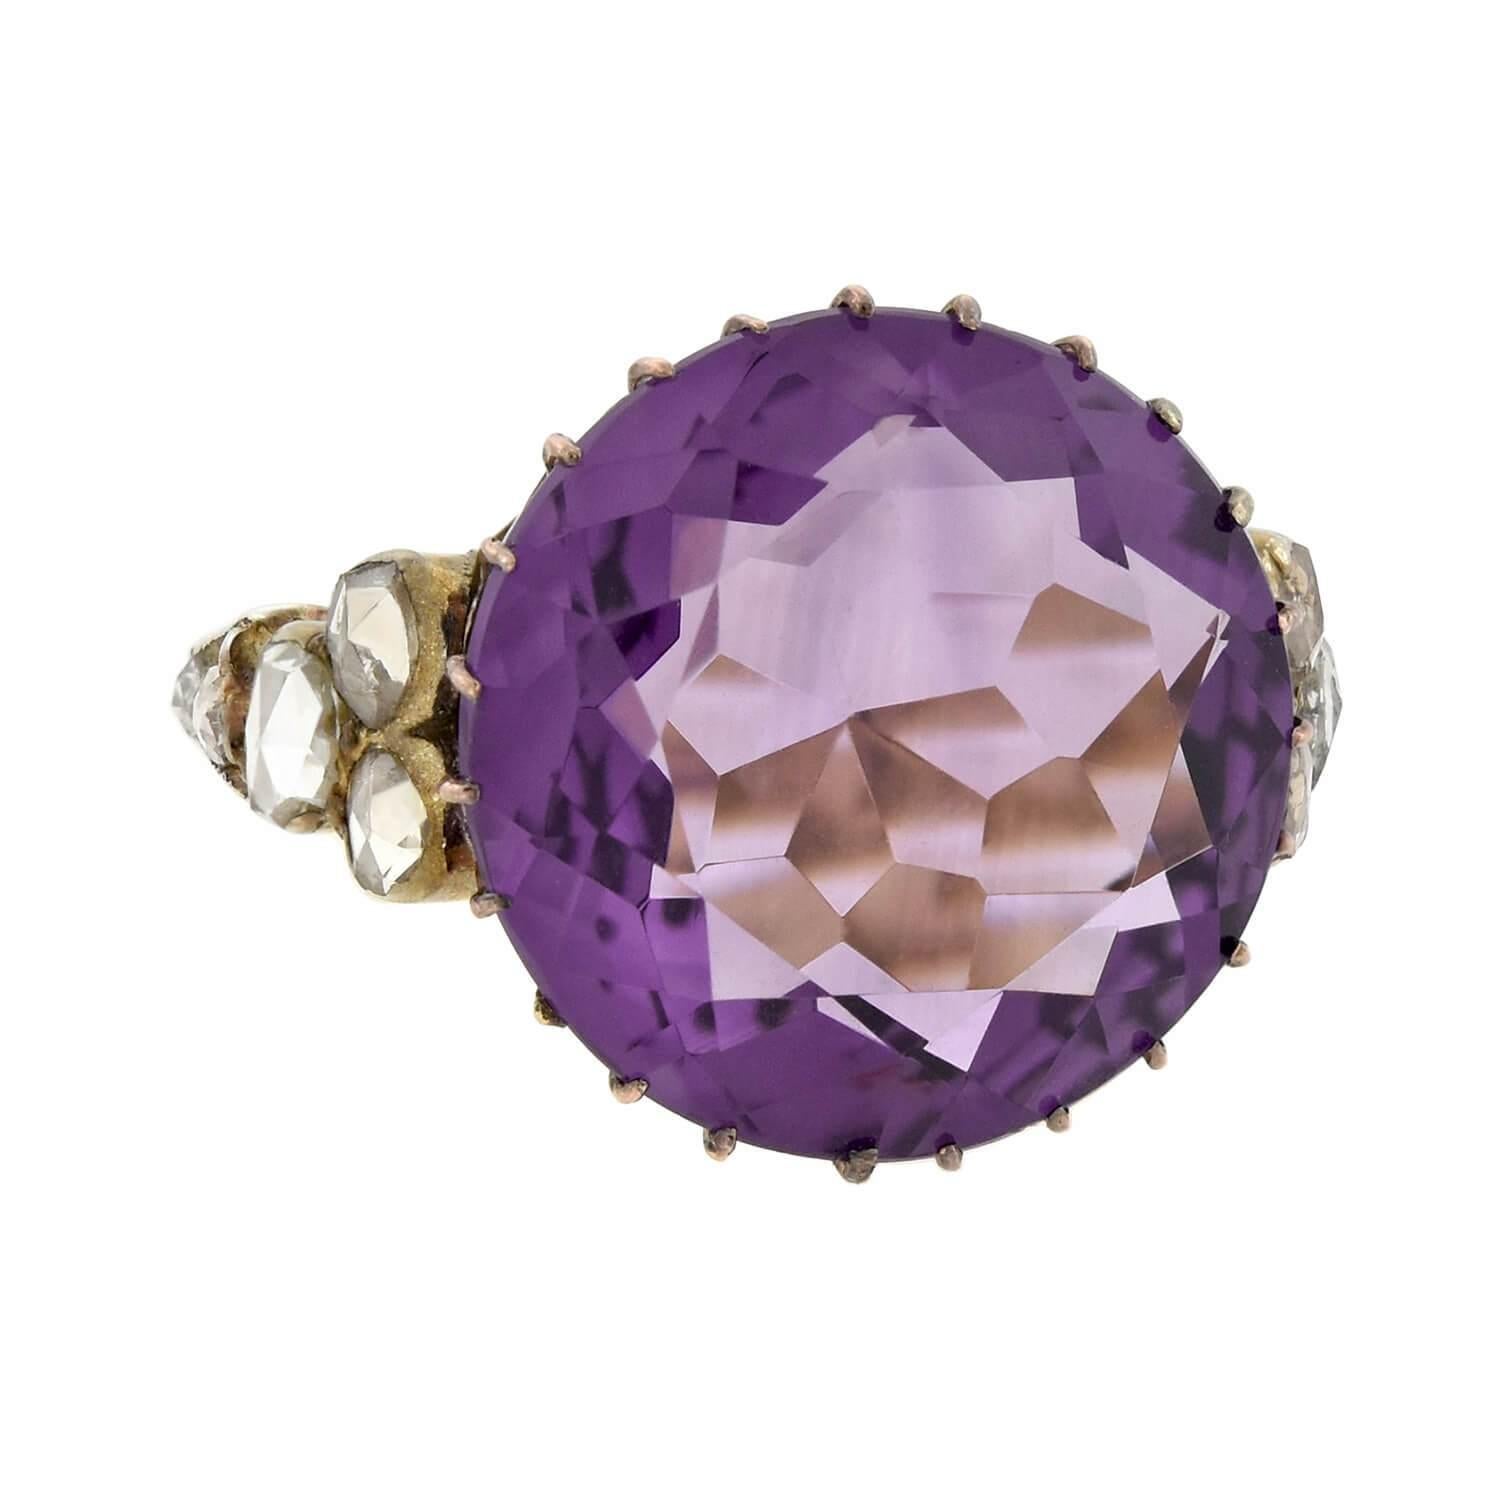 A gorgeous amethyst and diamond ring from the Edwardian (ca1910s) era! Crafted in 18kt gold, this striking piece features a substantial 14ct amethyst held within rose gold prongs. The vibrant, round stone has a vivid, royal purple hue and facets